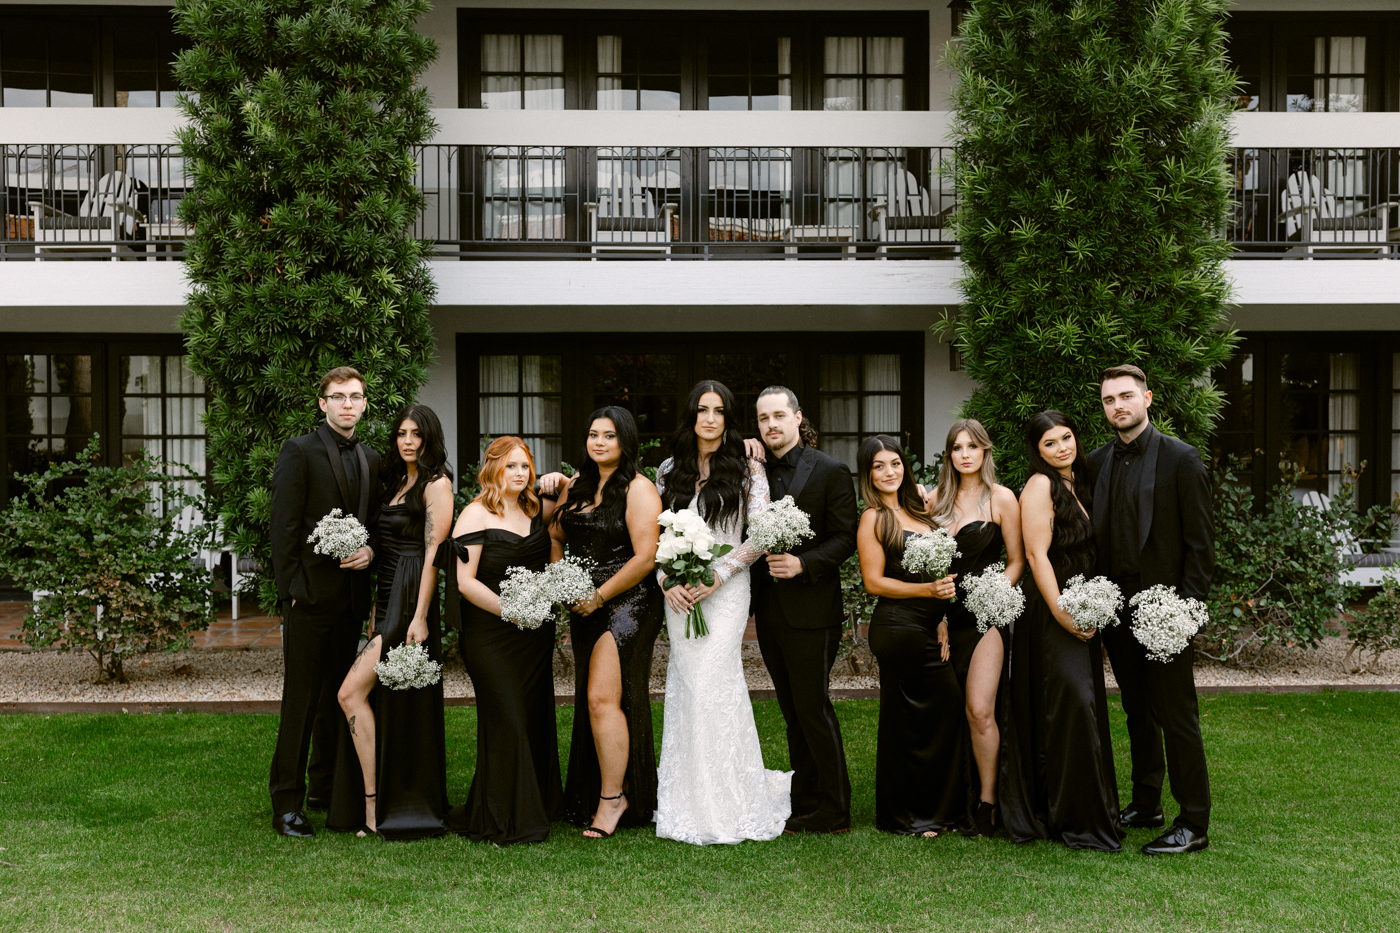 All black bridal outfits for luxury scottsdale wedding